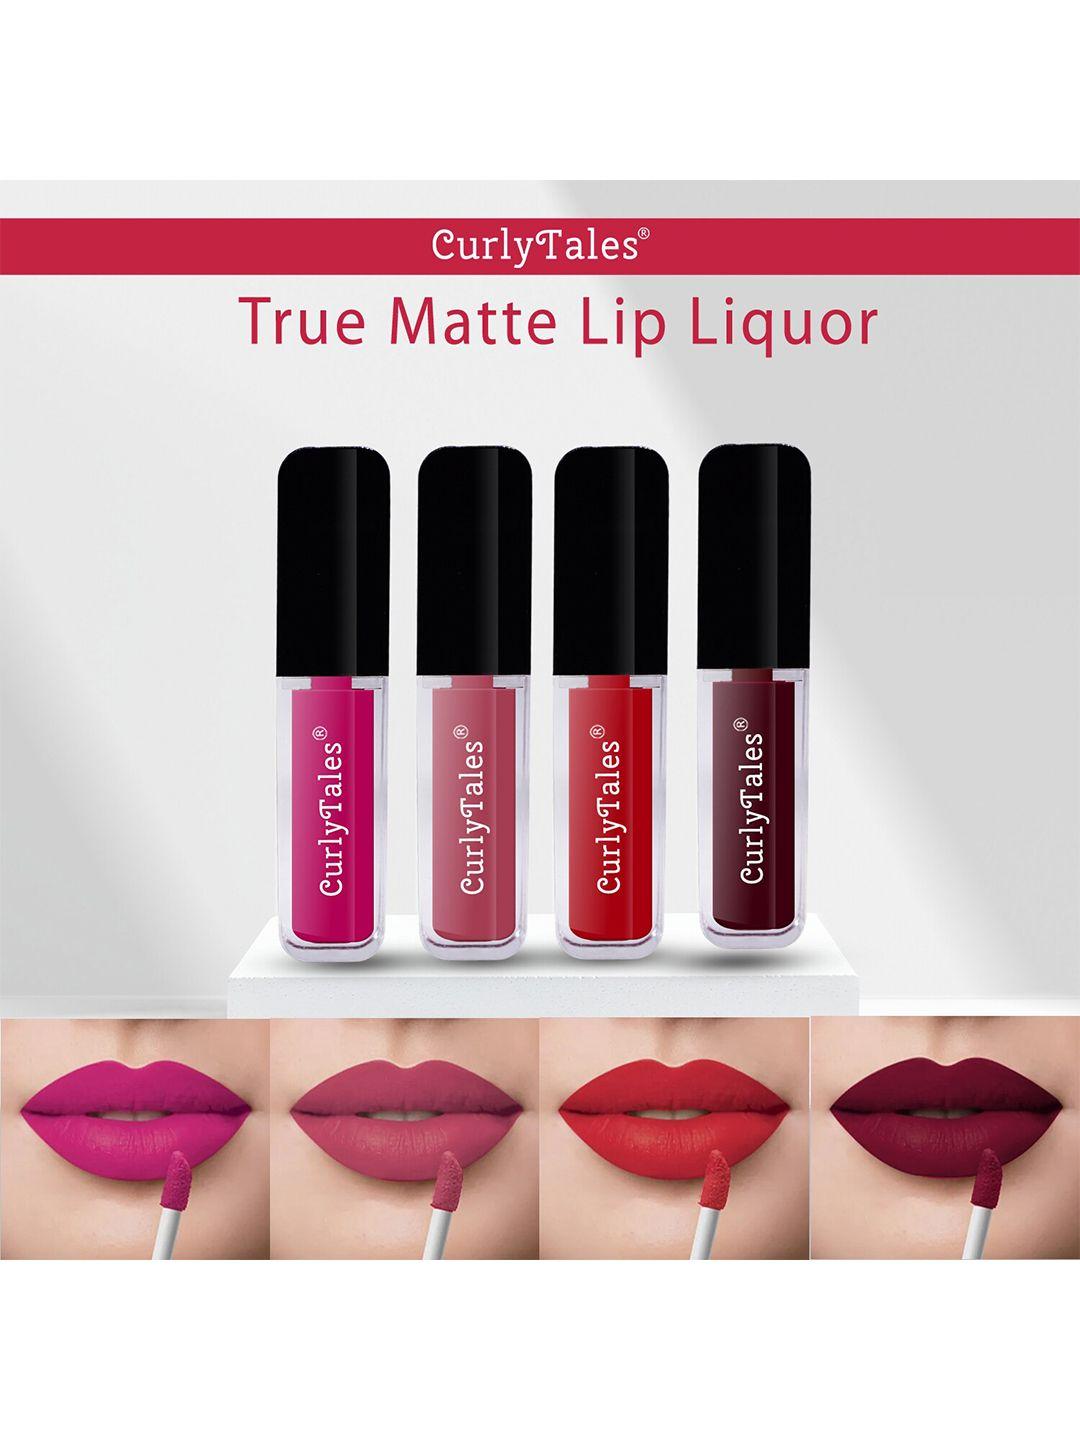 curlytales set of 4 true matte lip color 4 ml - shade 04, 10, 11, 13